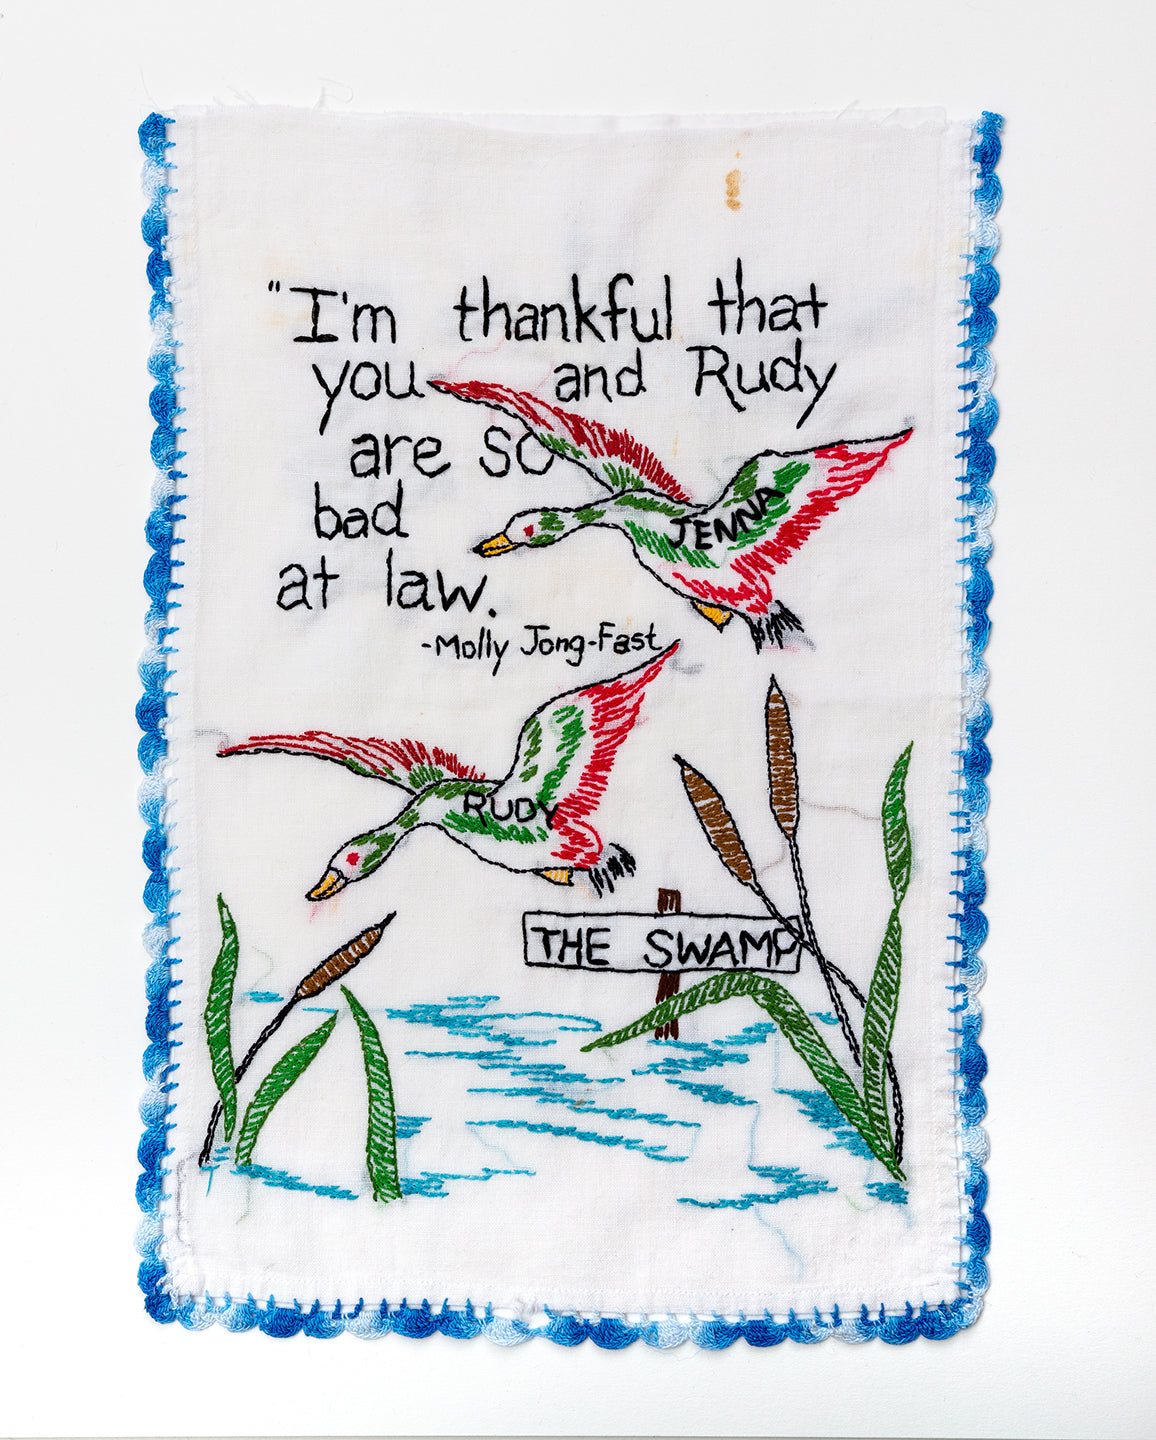 Diana Weymar | I'm thankful that you and Rudy are so bad at law